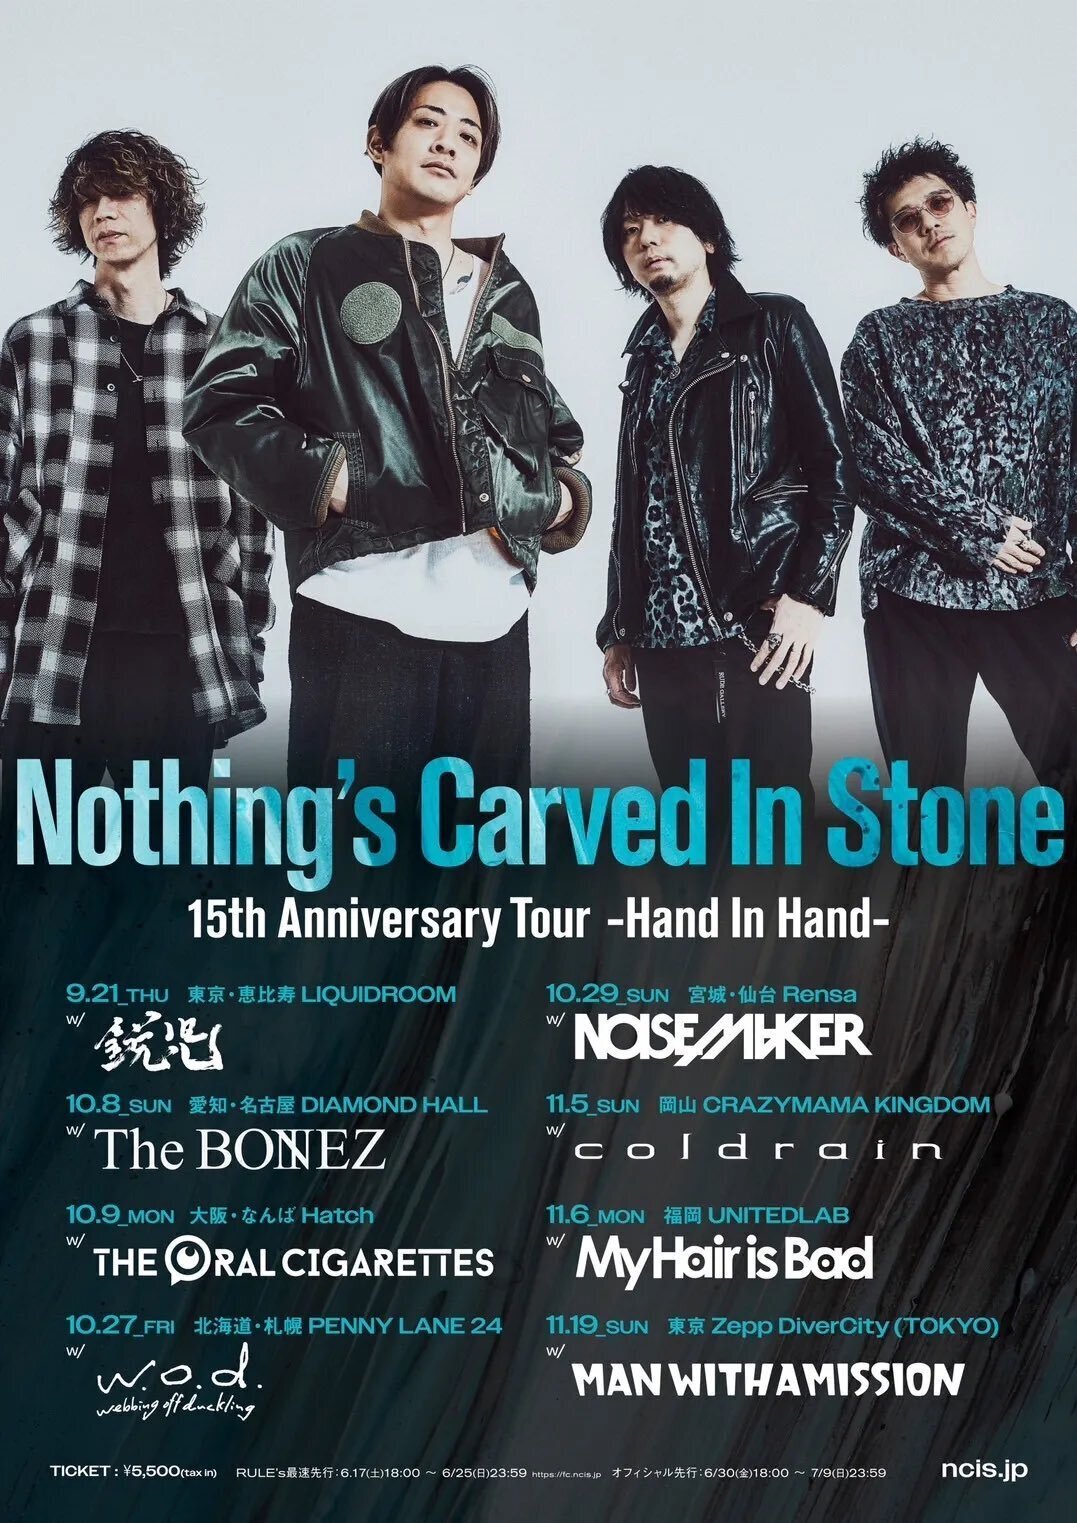 Nothingʼs Carved In Stone 15th Anniversary Tour 〜Hand In Hand